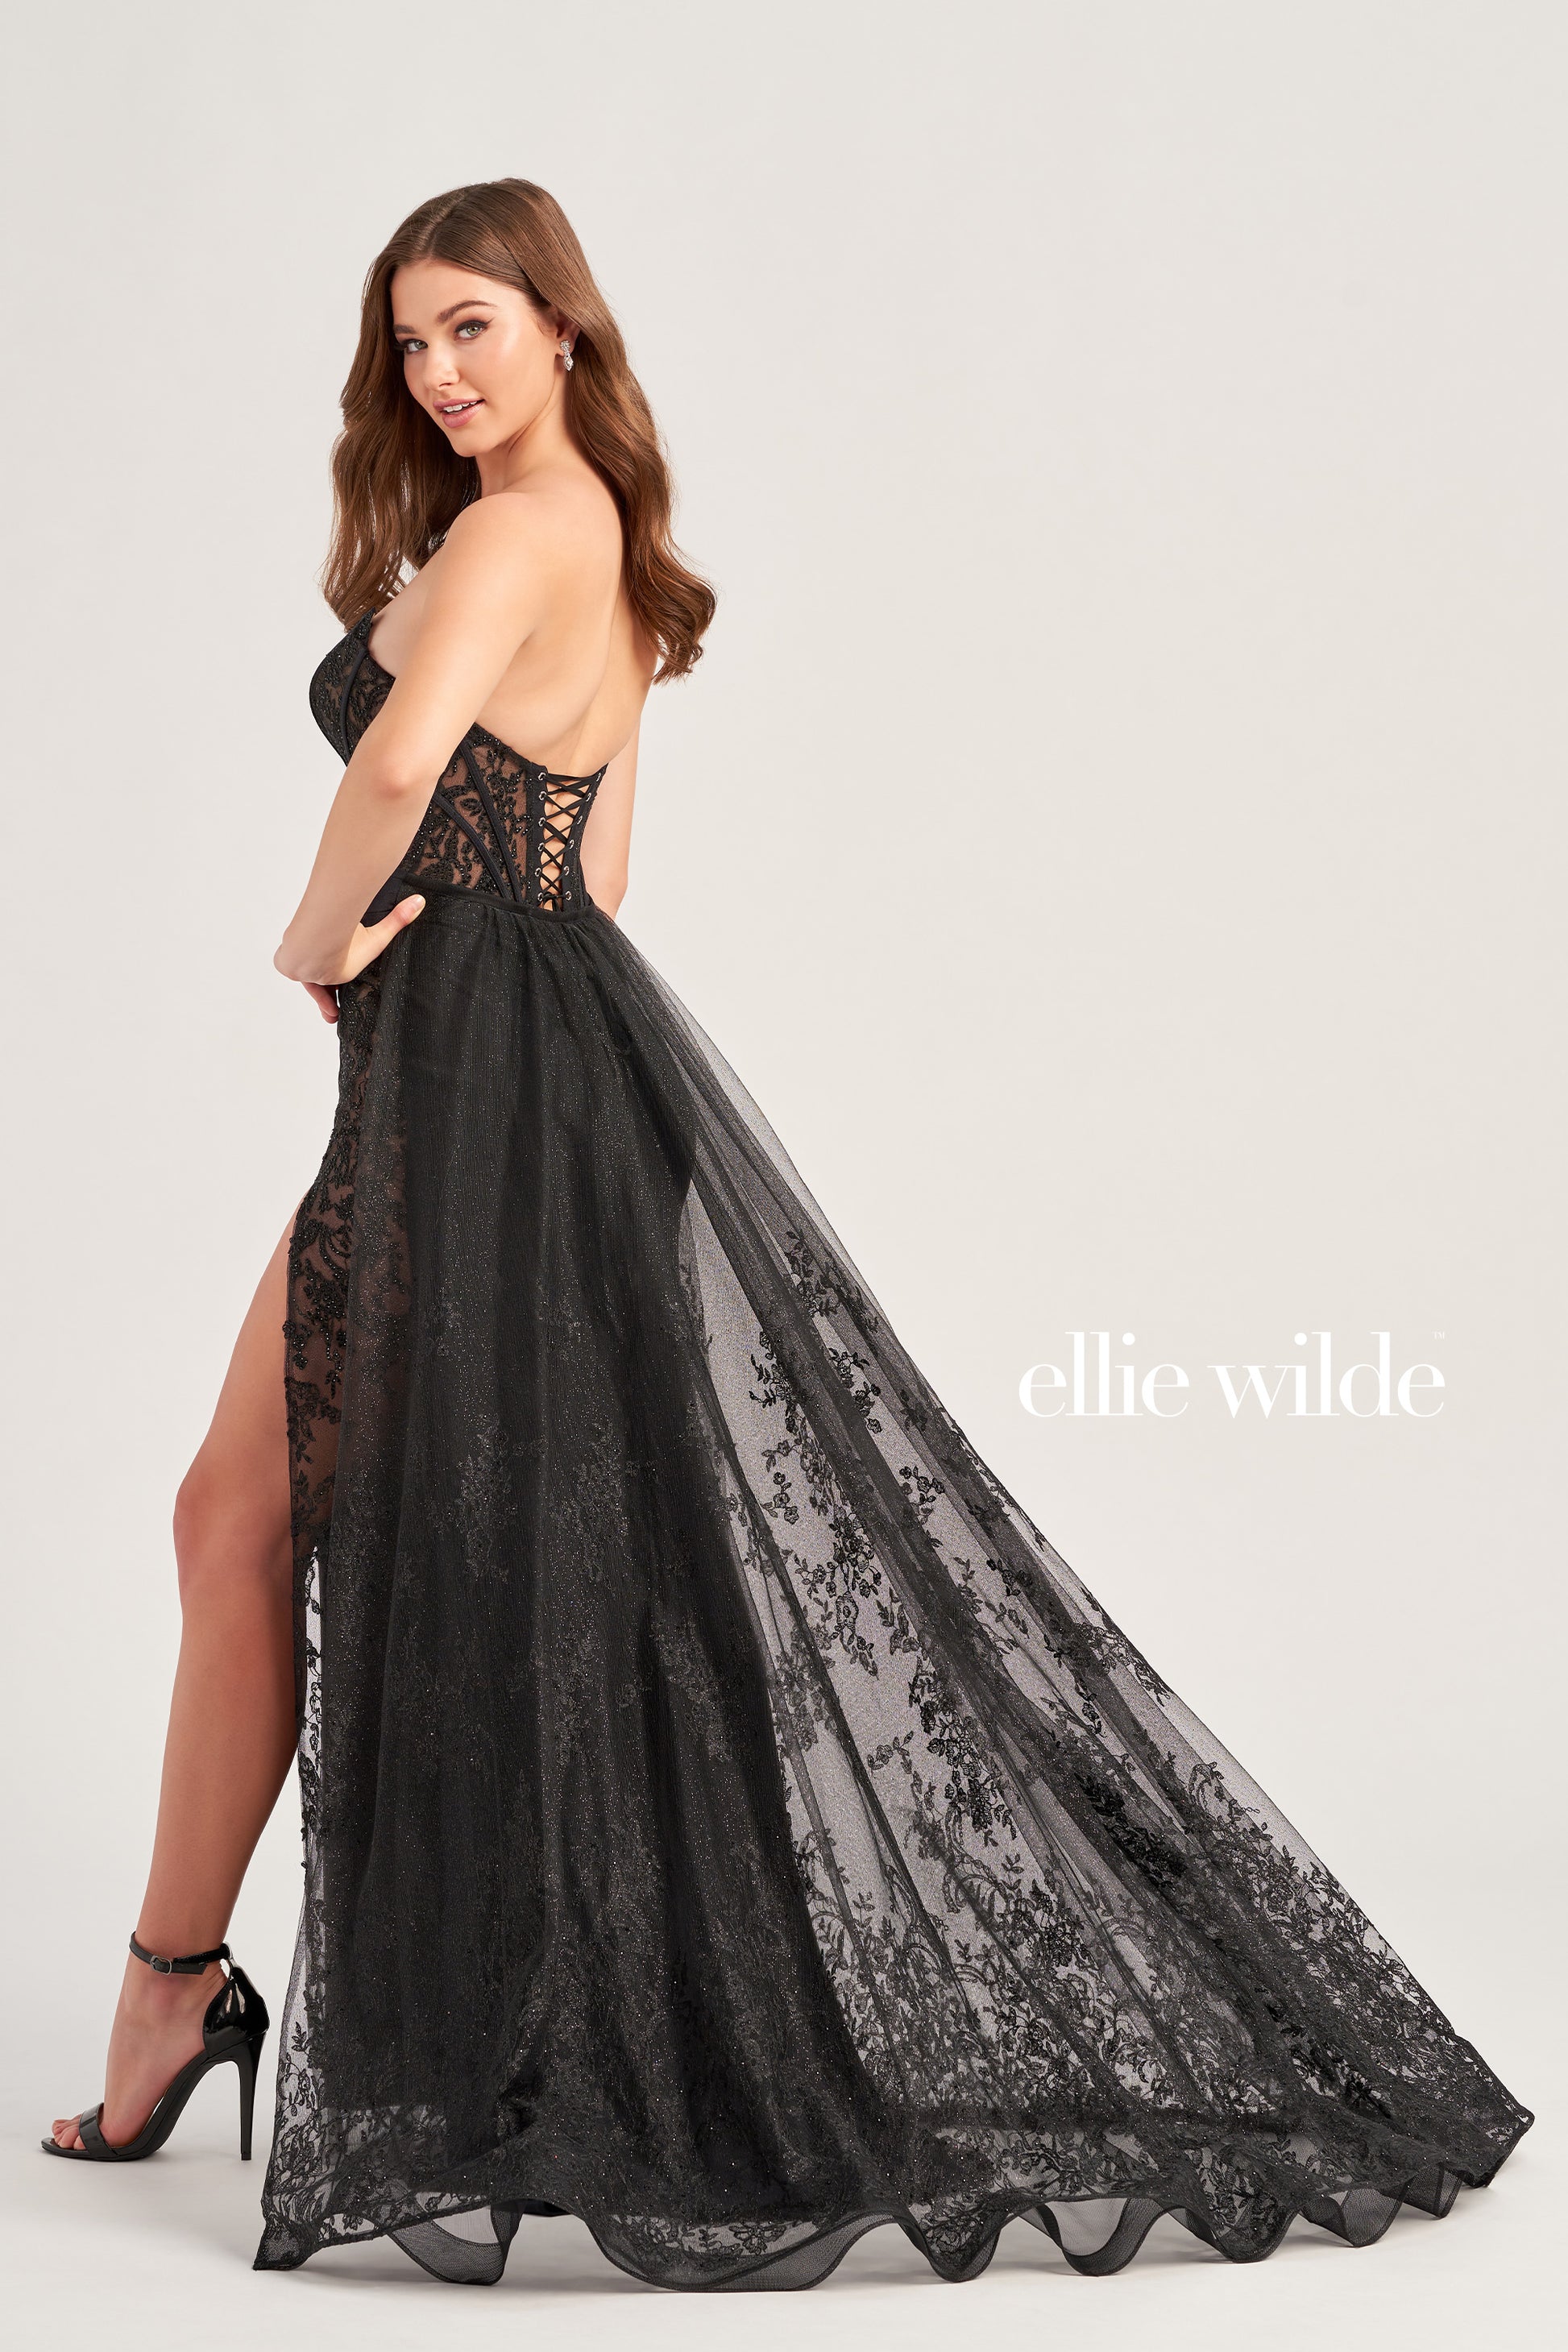 Be prepared to stun in this Ellie Wilde EW35032 long prom dress. Featuring a scoop neckline, glitter lace and stone accents, with a lace up grommet back and high slit for added flair. The corset bodice and detachable train ensure you make a statement. Crafted with stretch jersey for a comfortable fit-and-flare silhouette.  COLOR: BLACK, EMERALD, ROYAL BLUE, RUBY, IRIS, WHITE